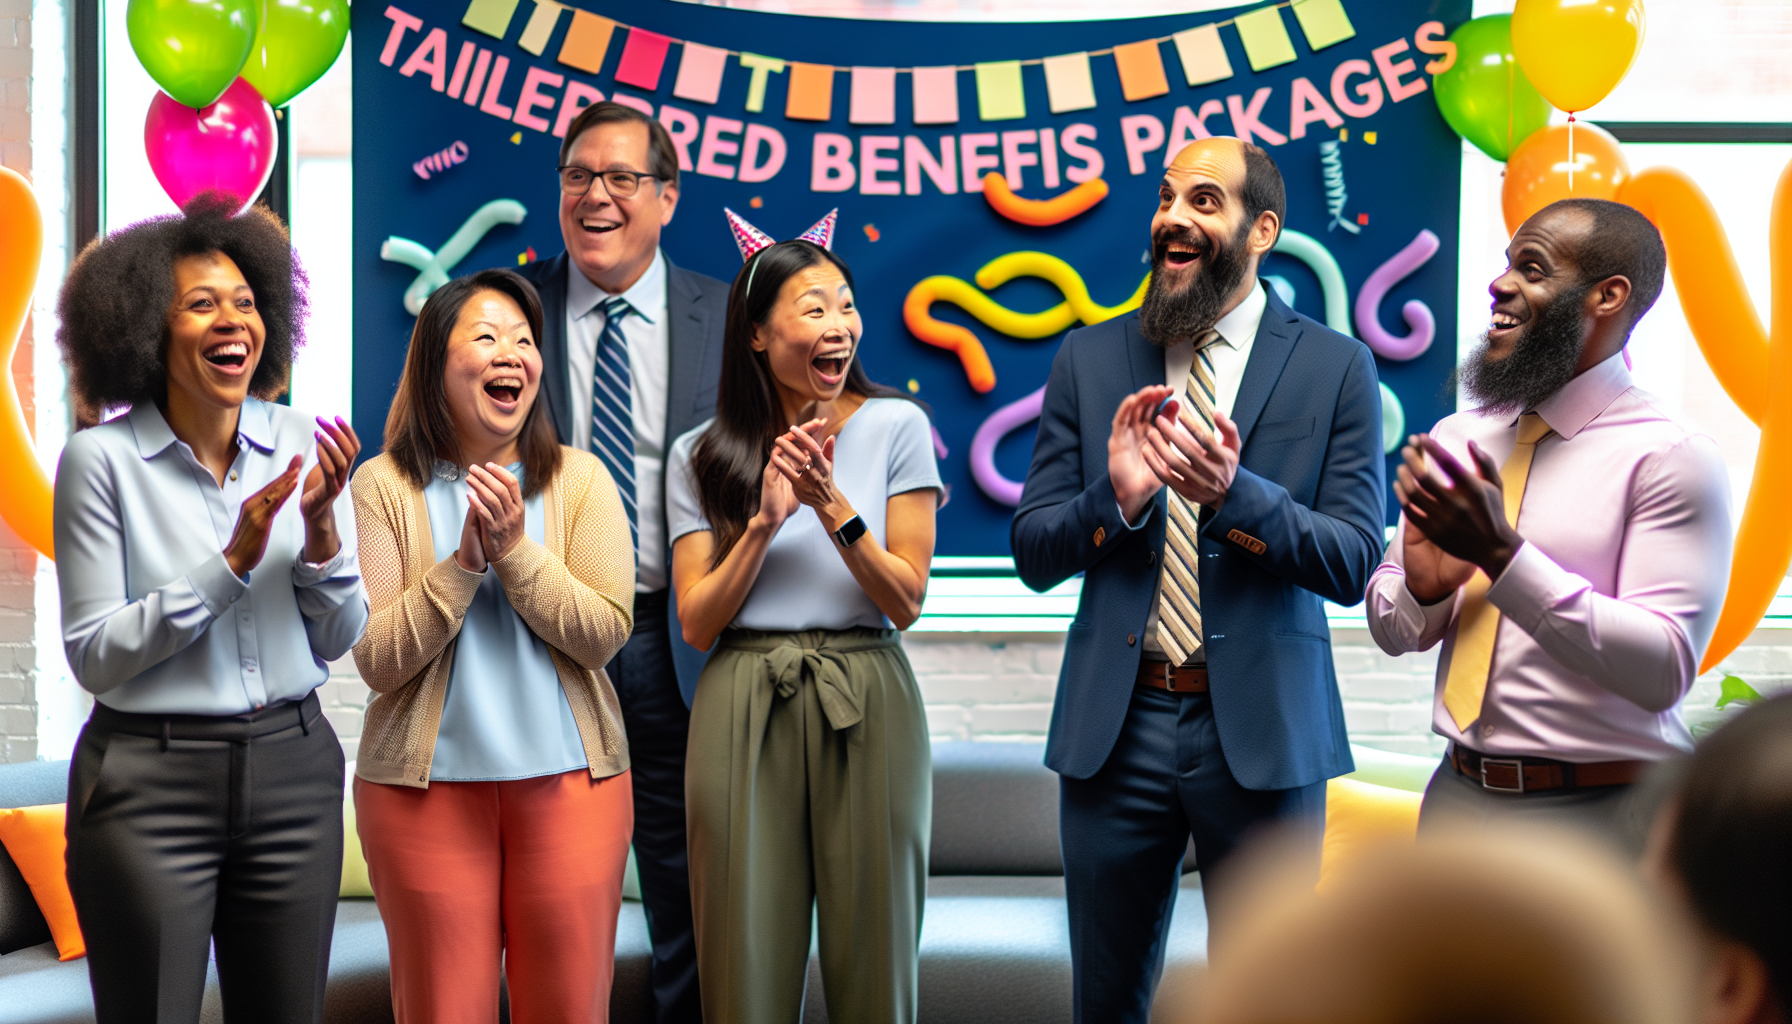 A successful employee benefit package celebration event